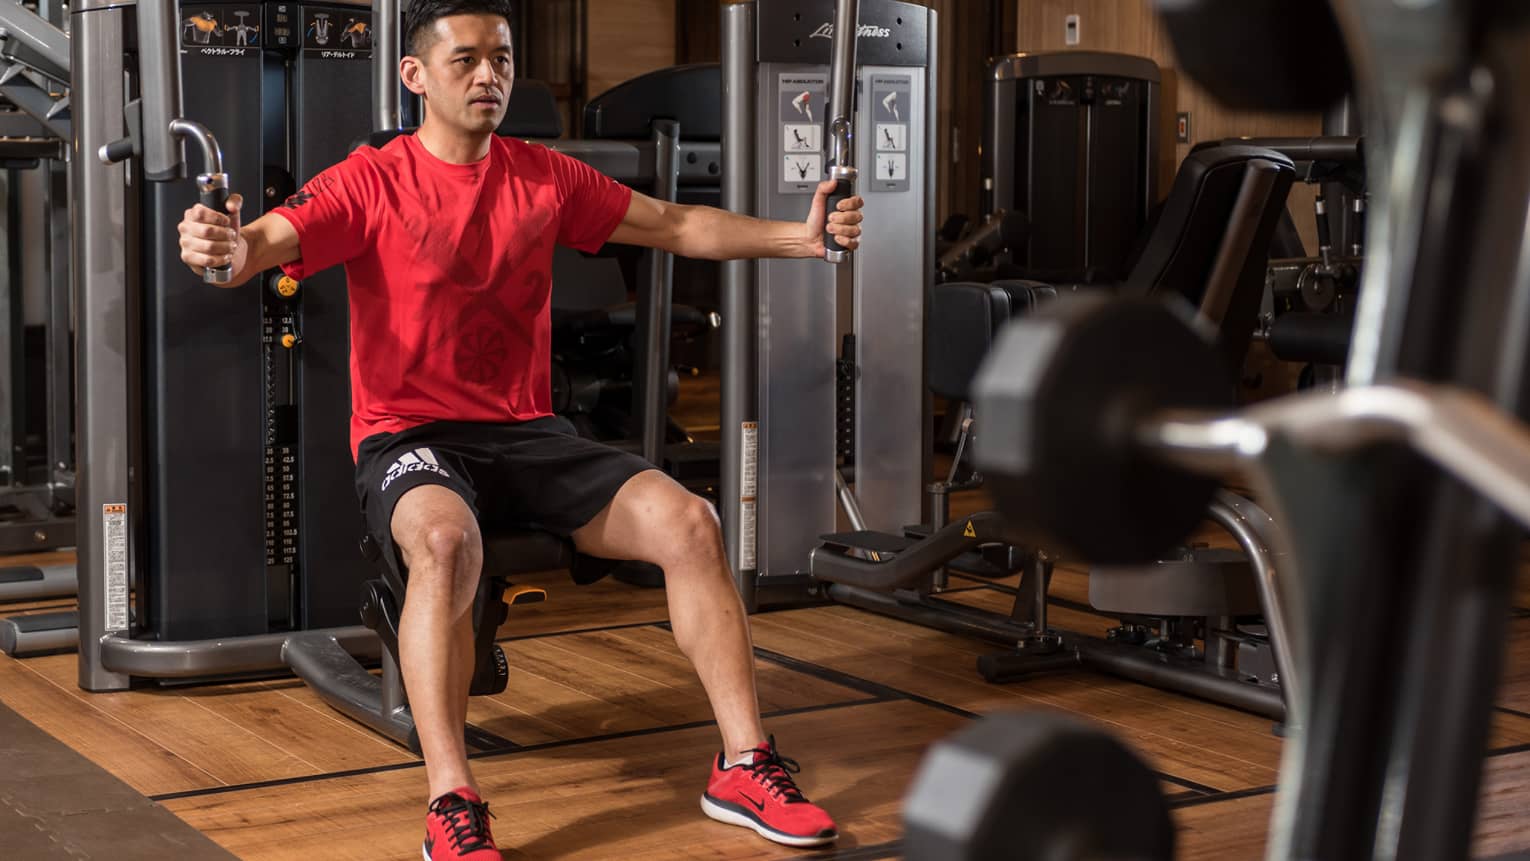 Man in red shirt sits on bench, prepares to pull weights in Fitness Centre